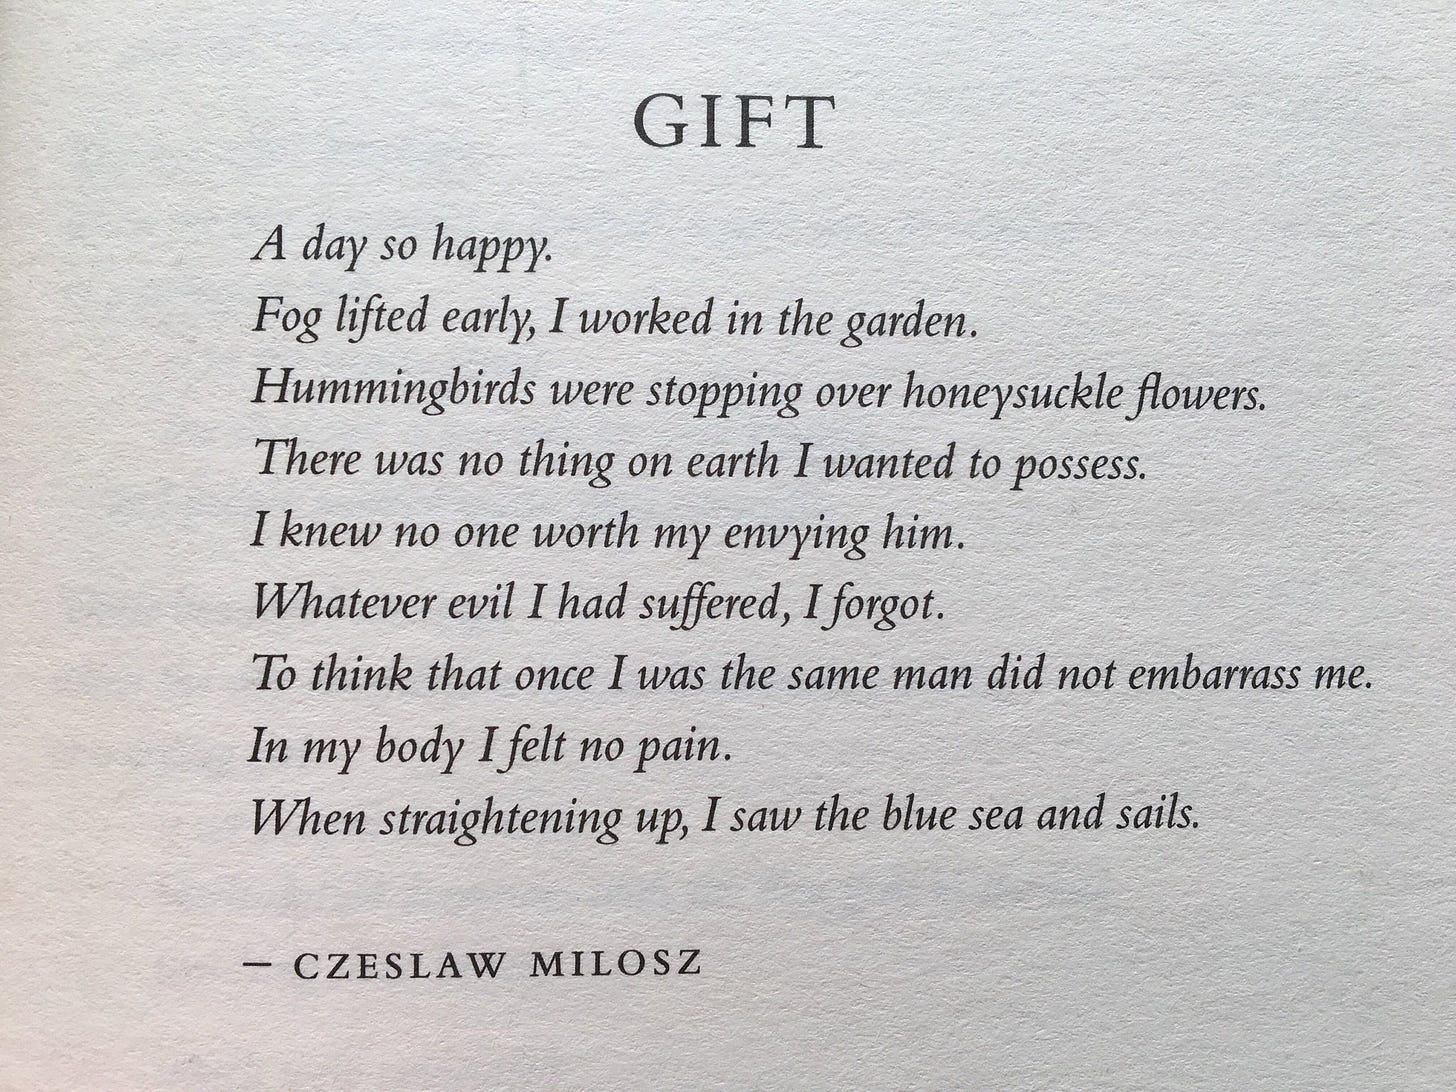 Kim French on X: "Gift by Czeslaw Milosz from A New Path to the Waterfall  by Raymond Carver https://t.co/IyzTwpbcrA" / X